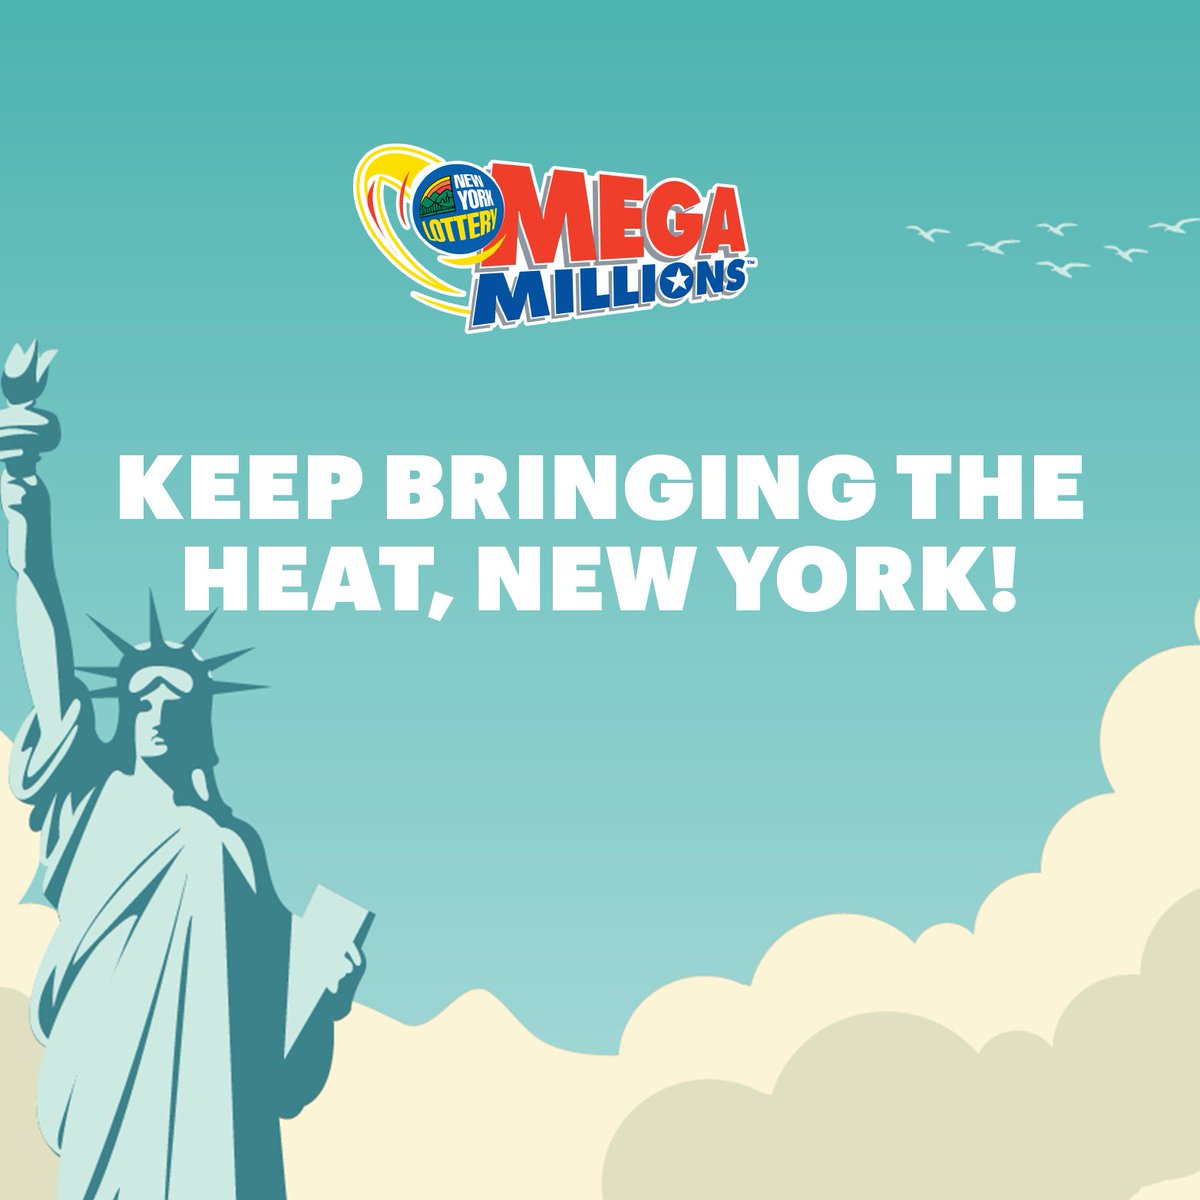 Check those tickets, New York! The 4/9 Mega Millions drawing had a $1,000,000 second prize winning ticket sold in Ozone Park, NY. Join us in congratulating our latest winner! #newyorklottery #pleaseplayresponsibly #MustBe18+